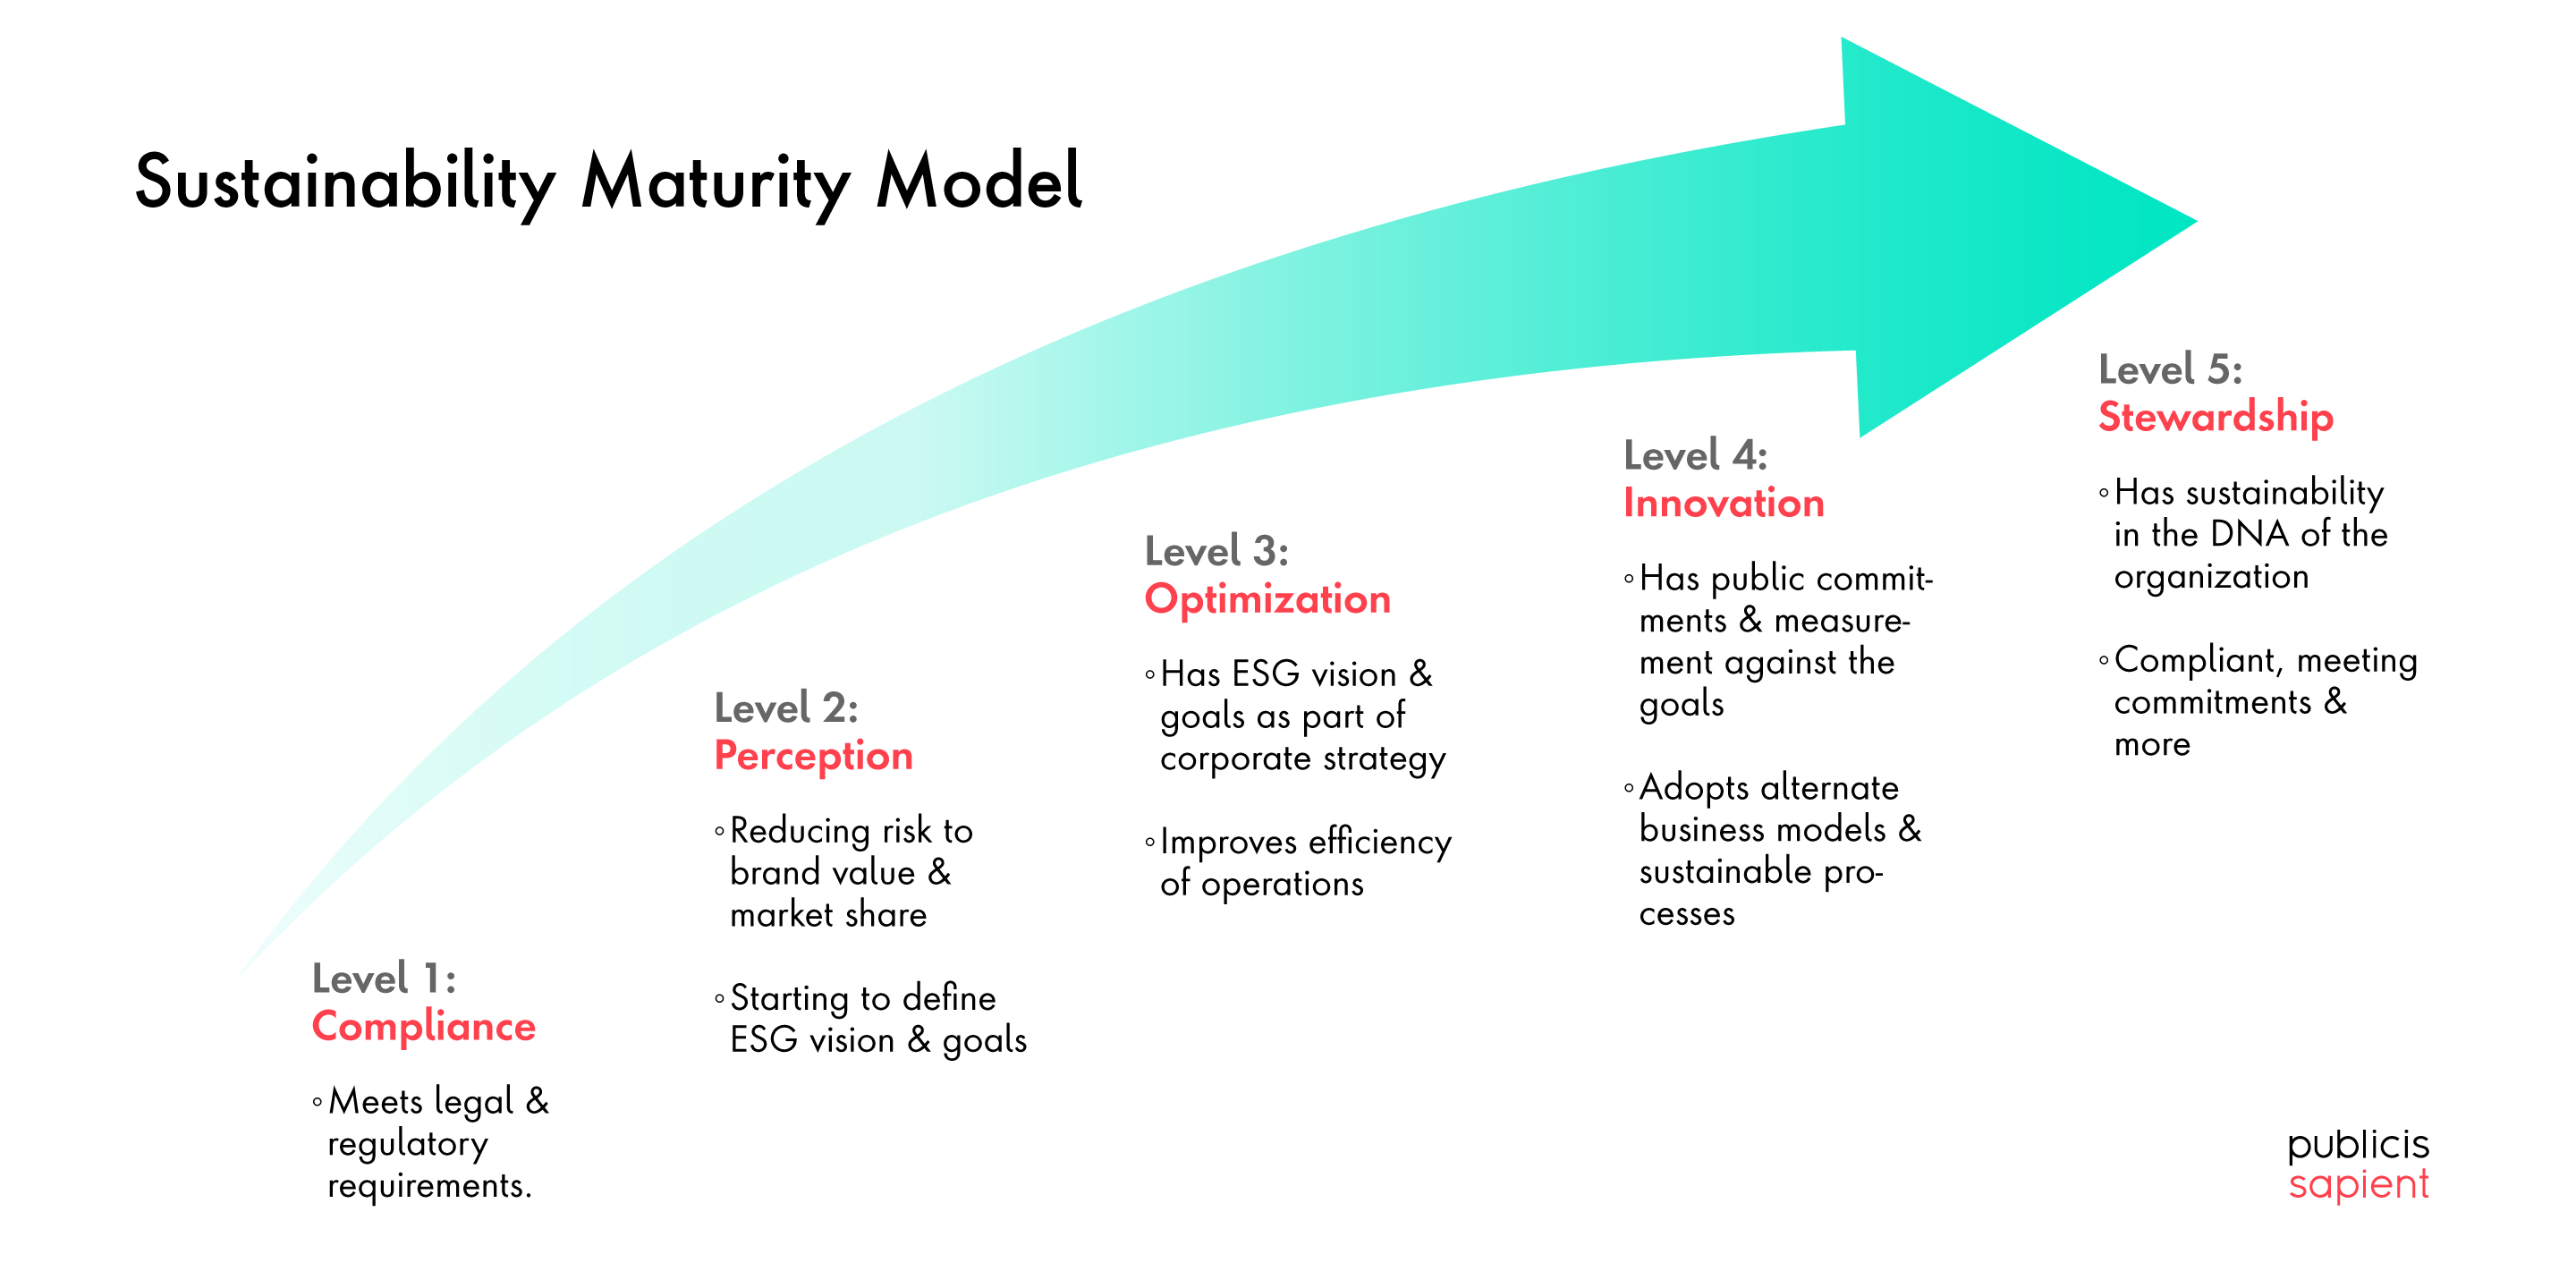 Sustainability Maturity Model illustrating the five levels of maturity.